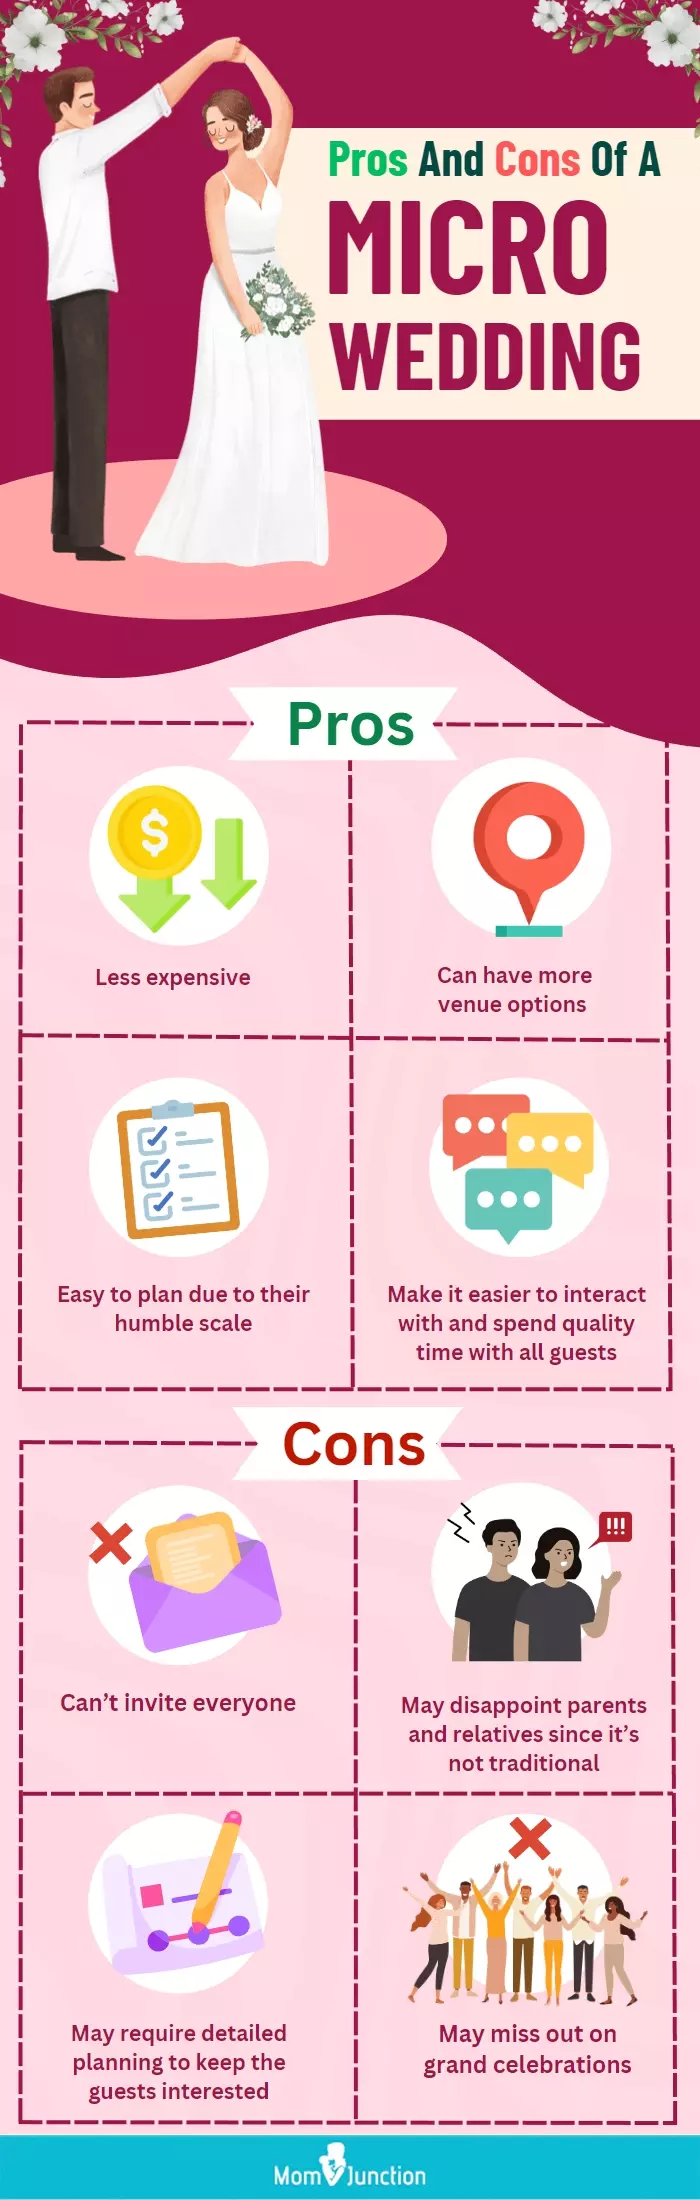 pros and cons of a micro wedding (infographic)